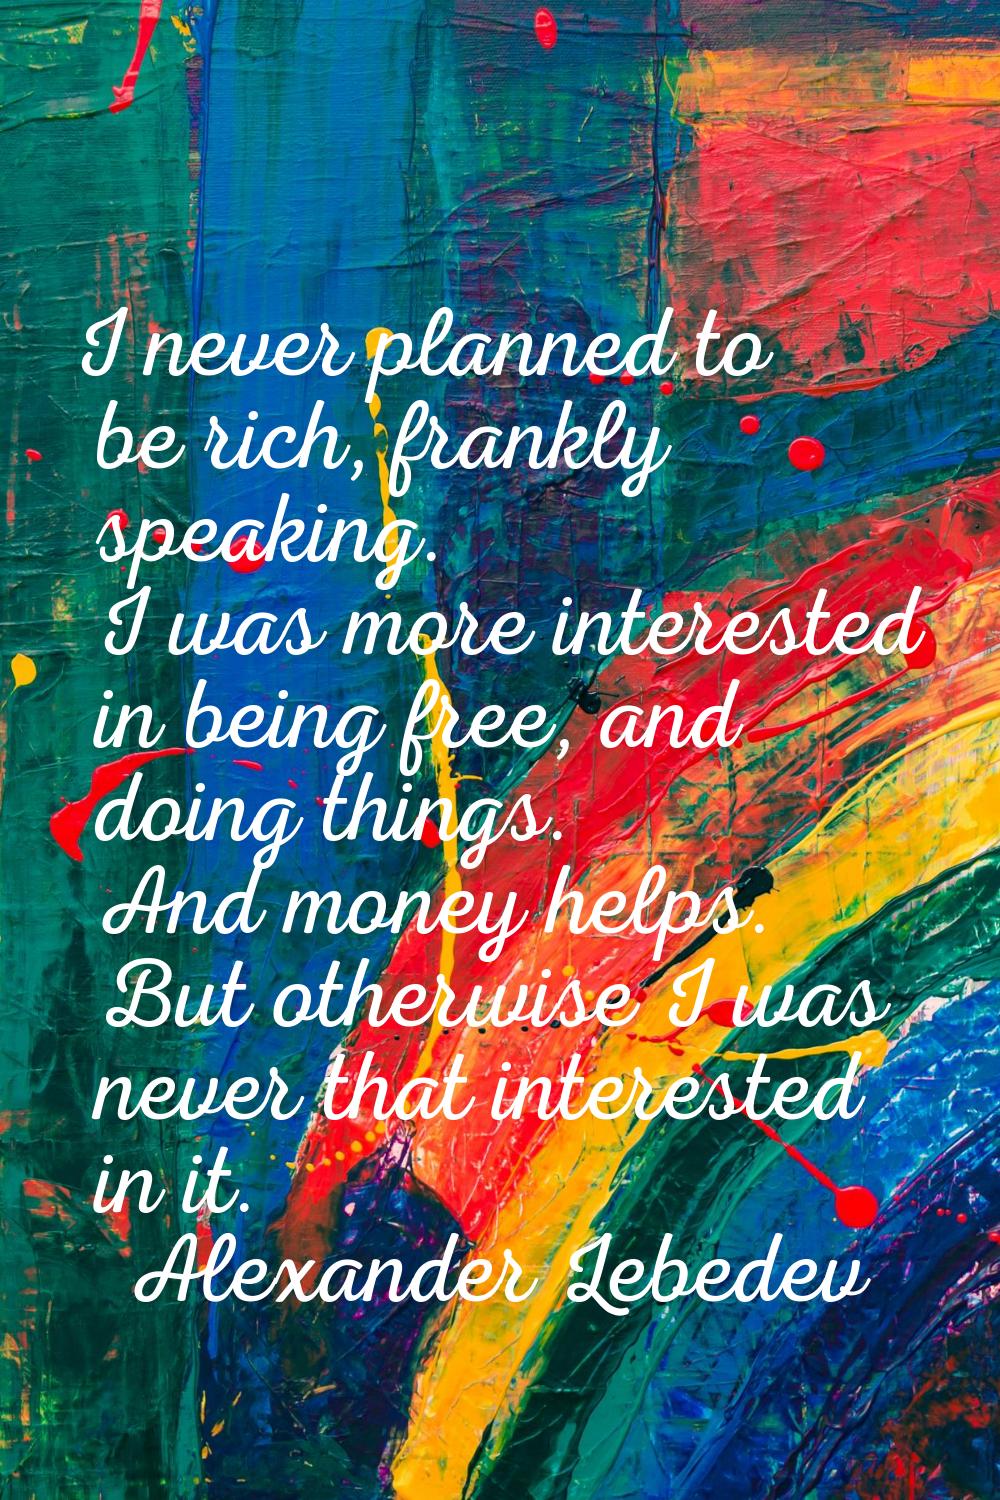 I never planned to be rich, frankly speaking. I was more interested in being free, and doing things